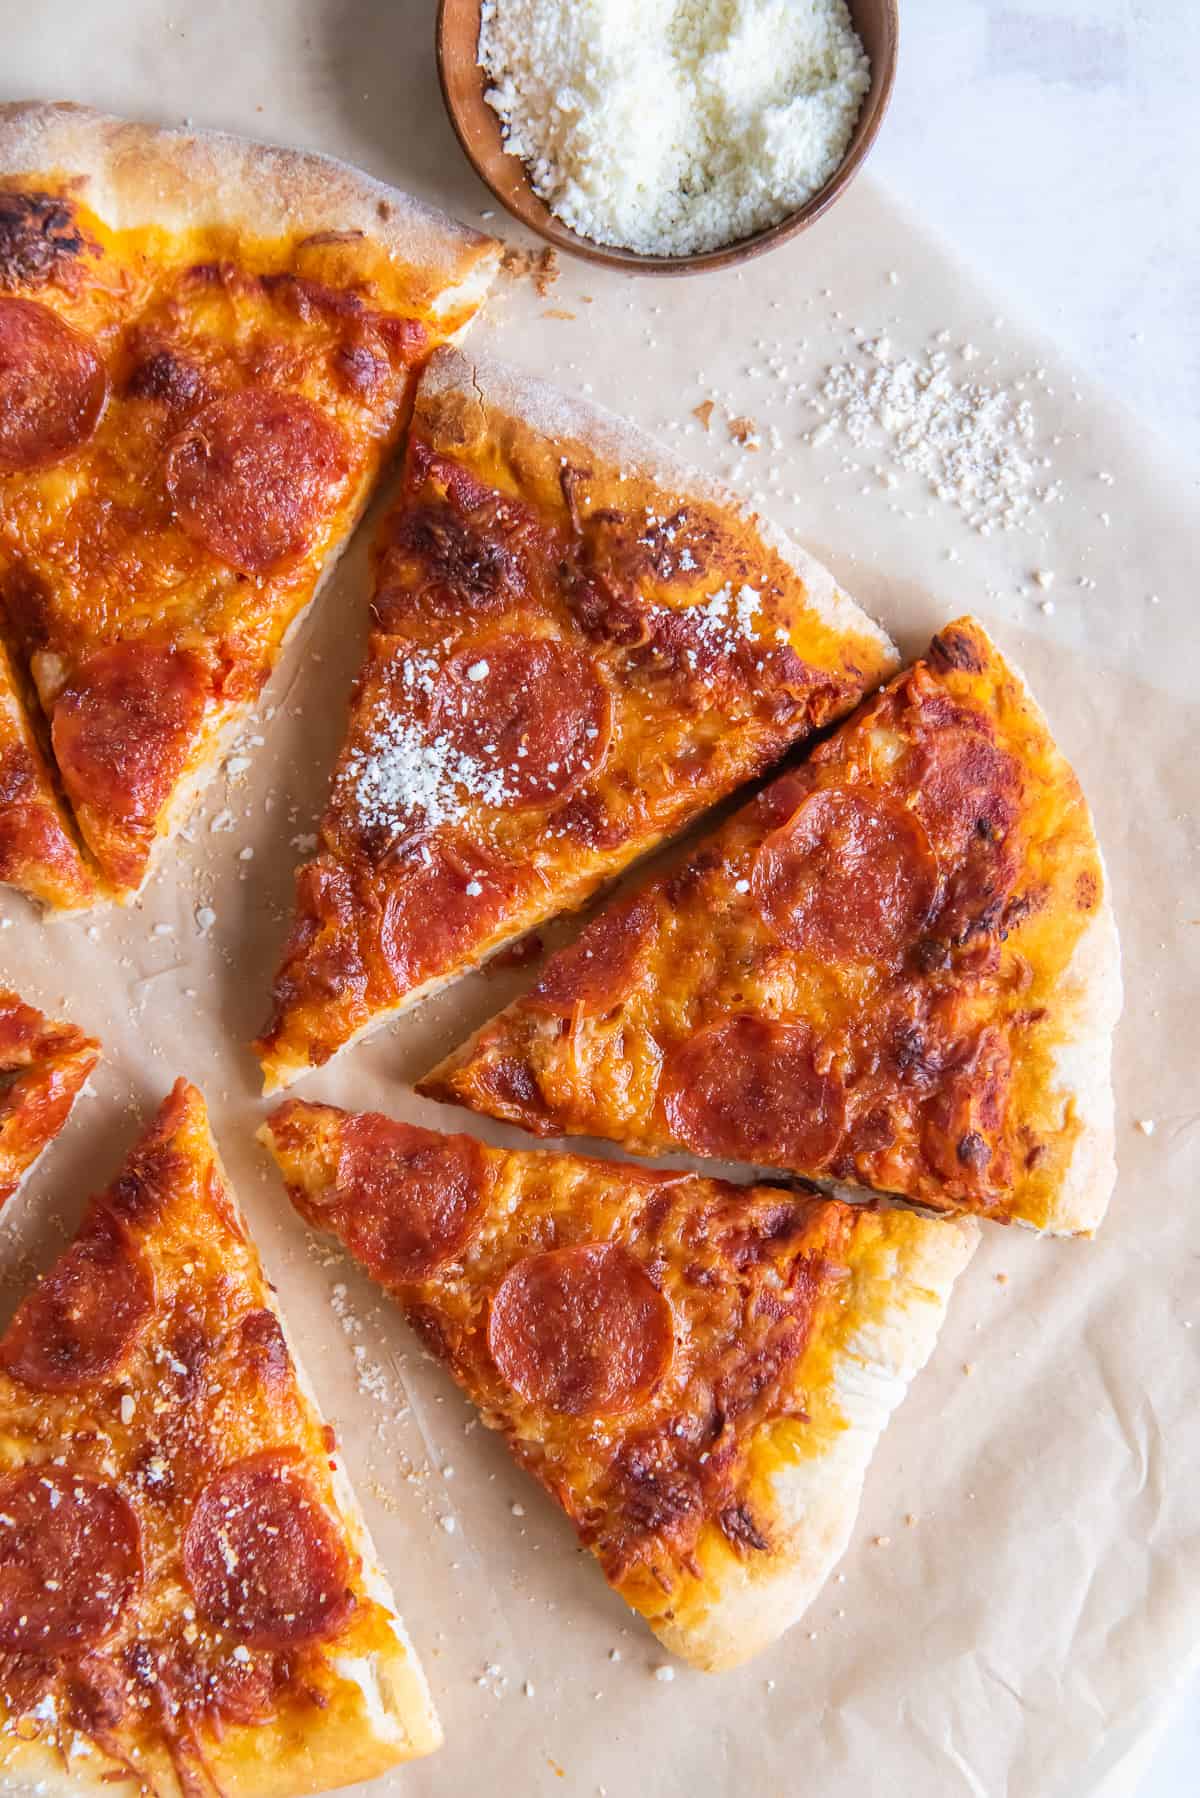 Slices pf pepperoni pizza on parchment paper.